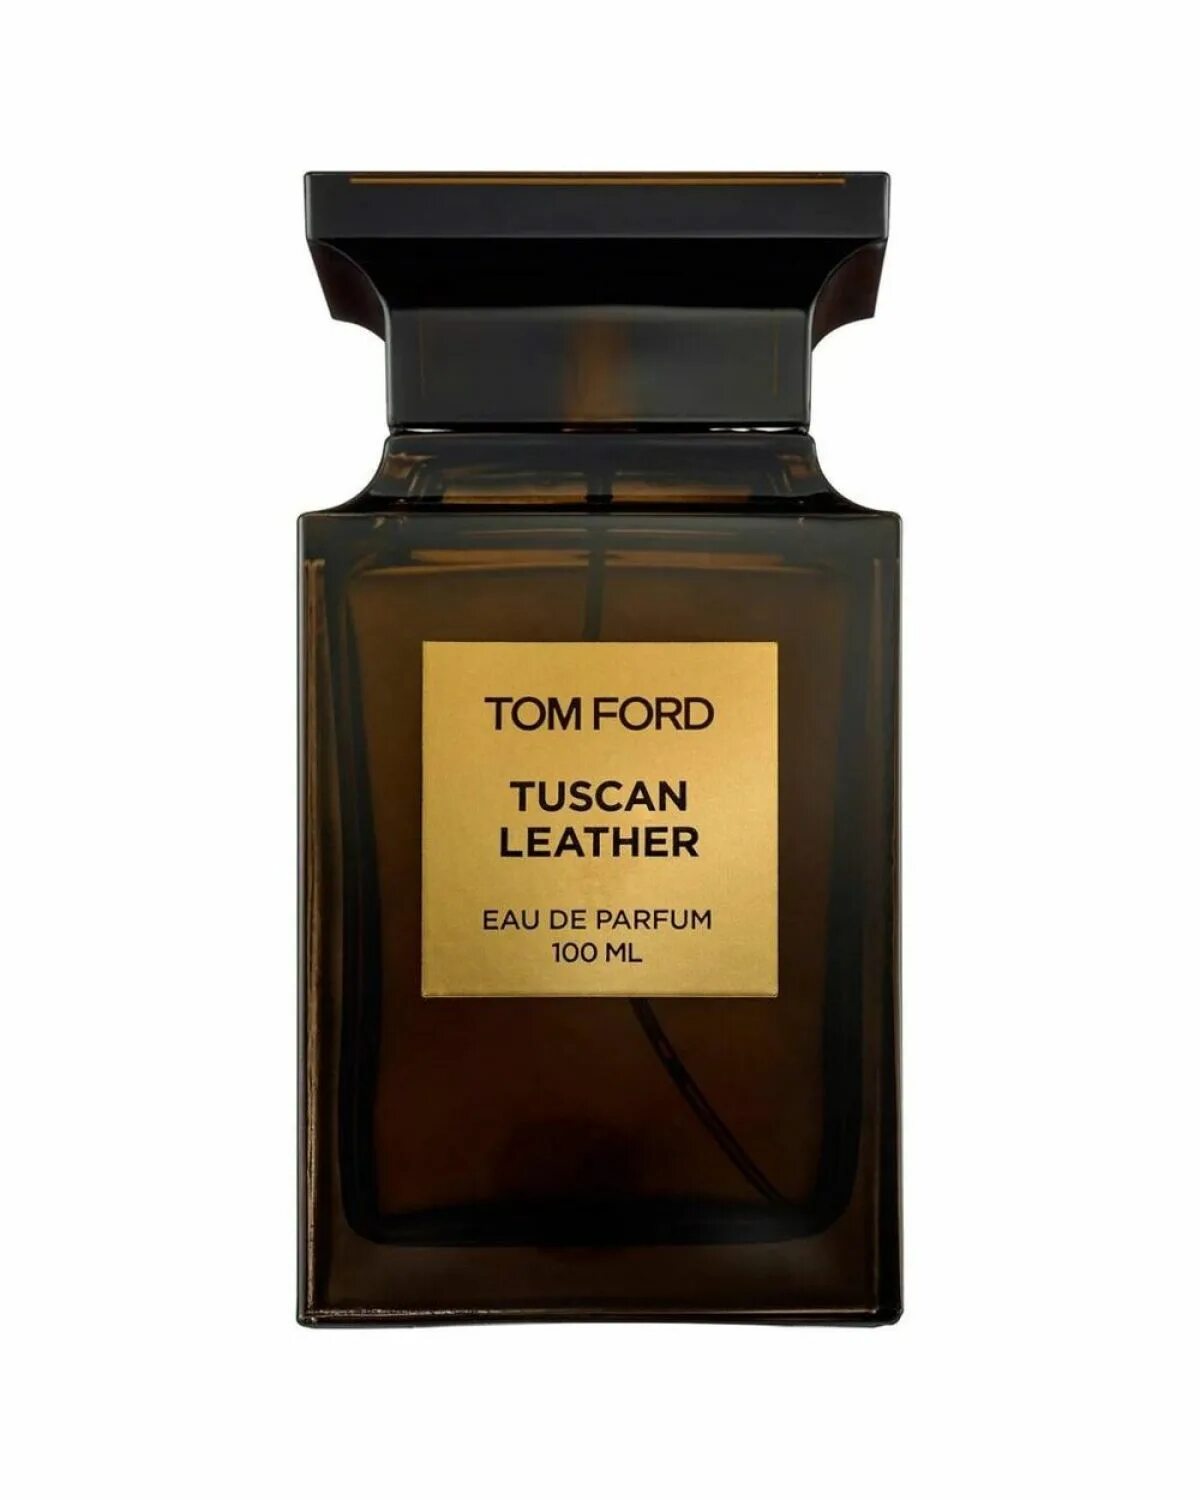 Tom Ford Tuscan Leather 100ml. Tom Ford Tuscan Leather 100 мл. Tom Ford White Suede 100 ml. Tobacco Vanille Tom Ford 100мл. Мужской аромат табак